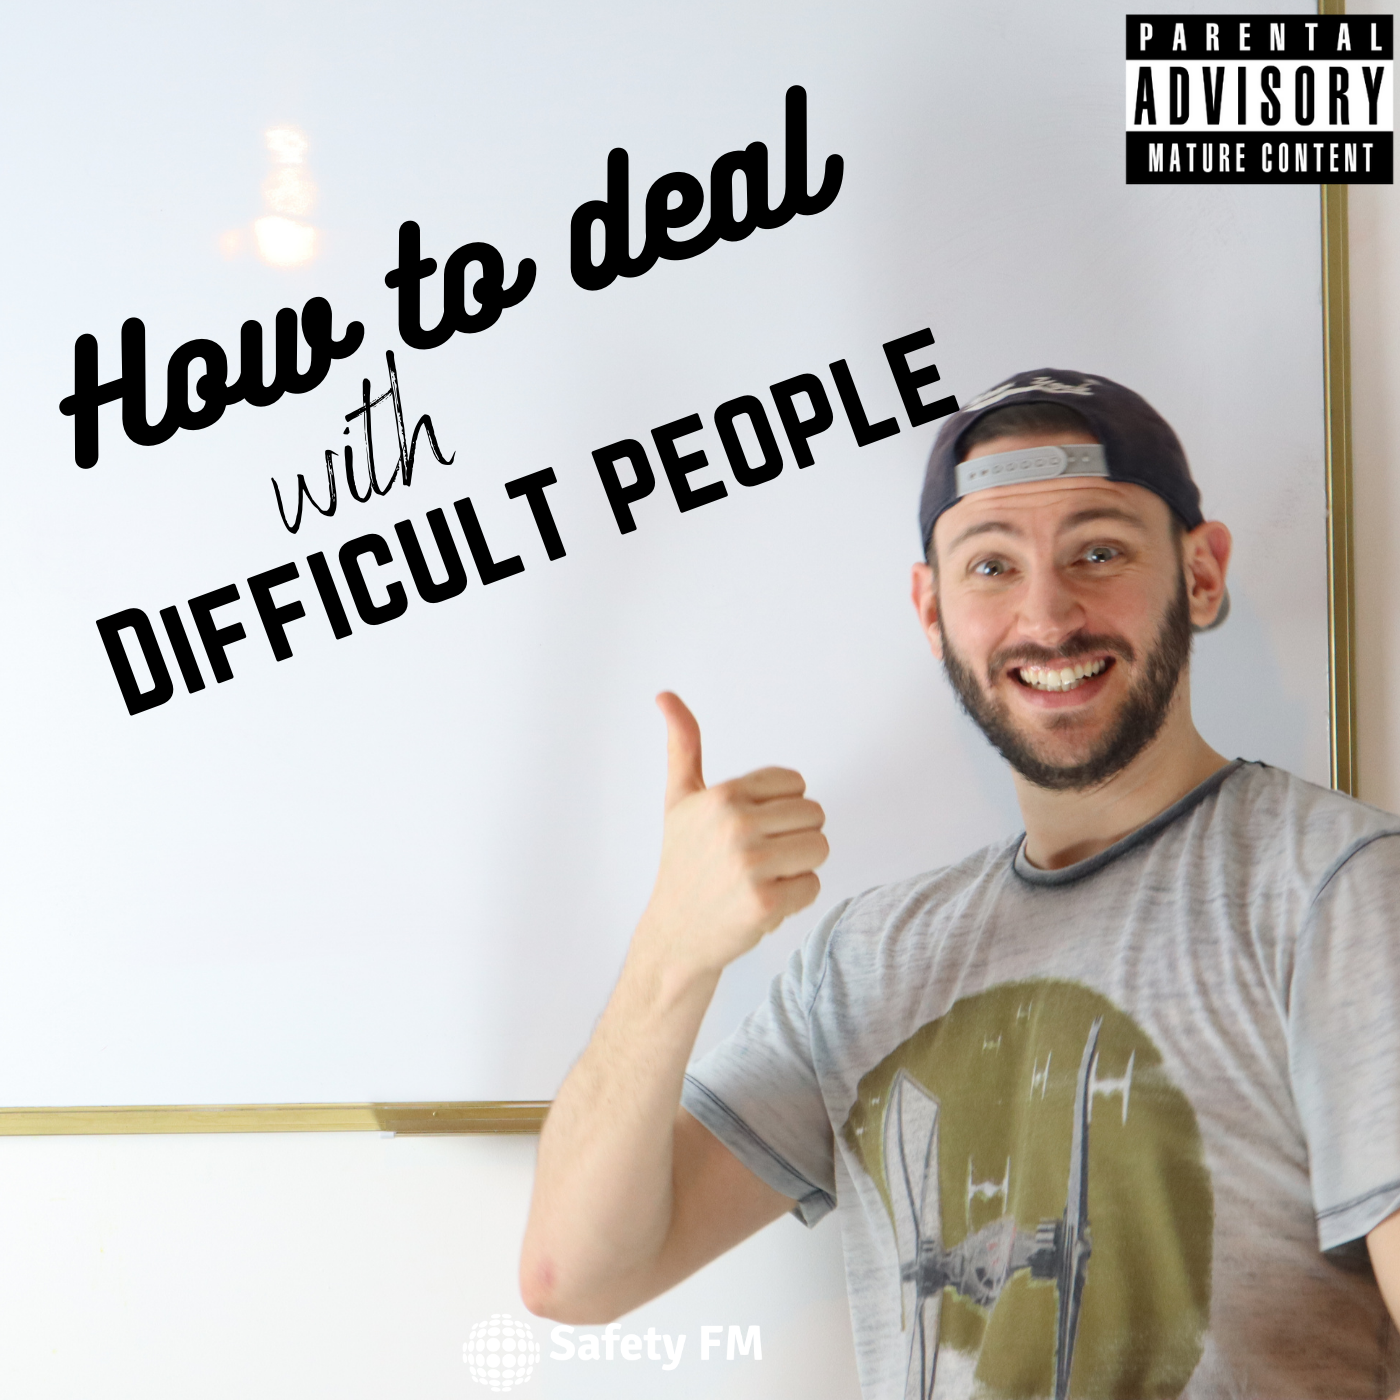 How to deal with difficult people. Learn from my failures